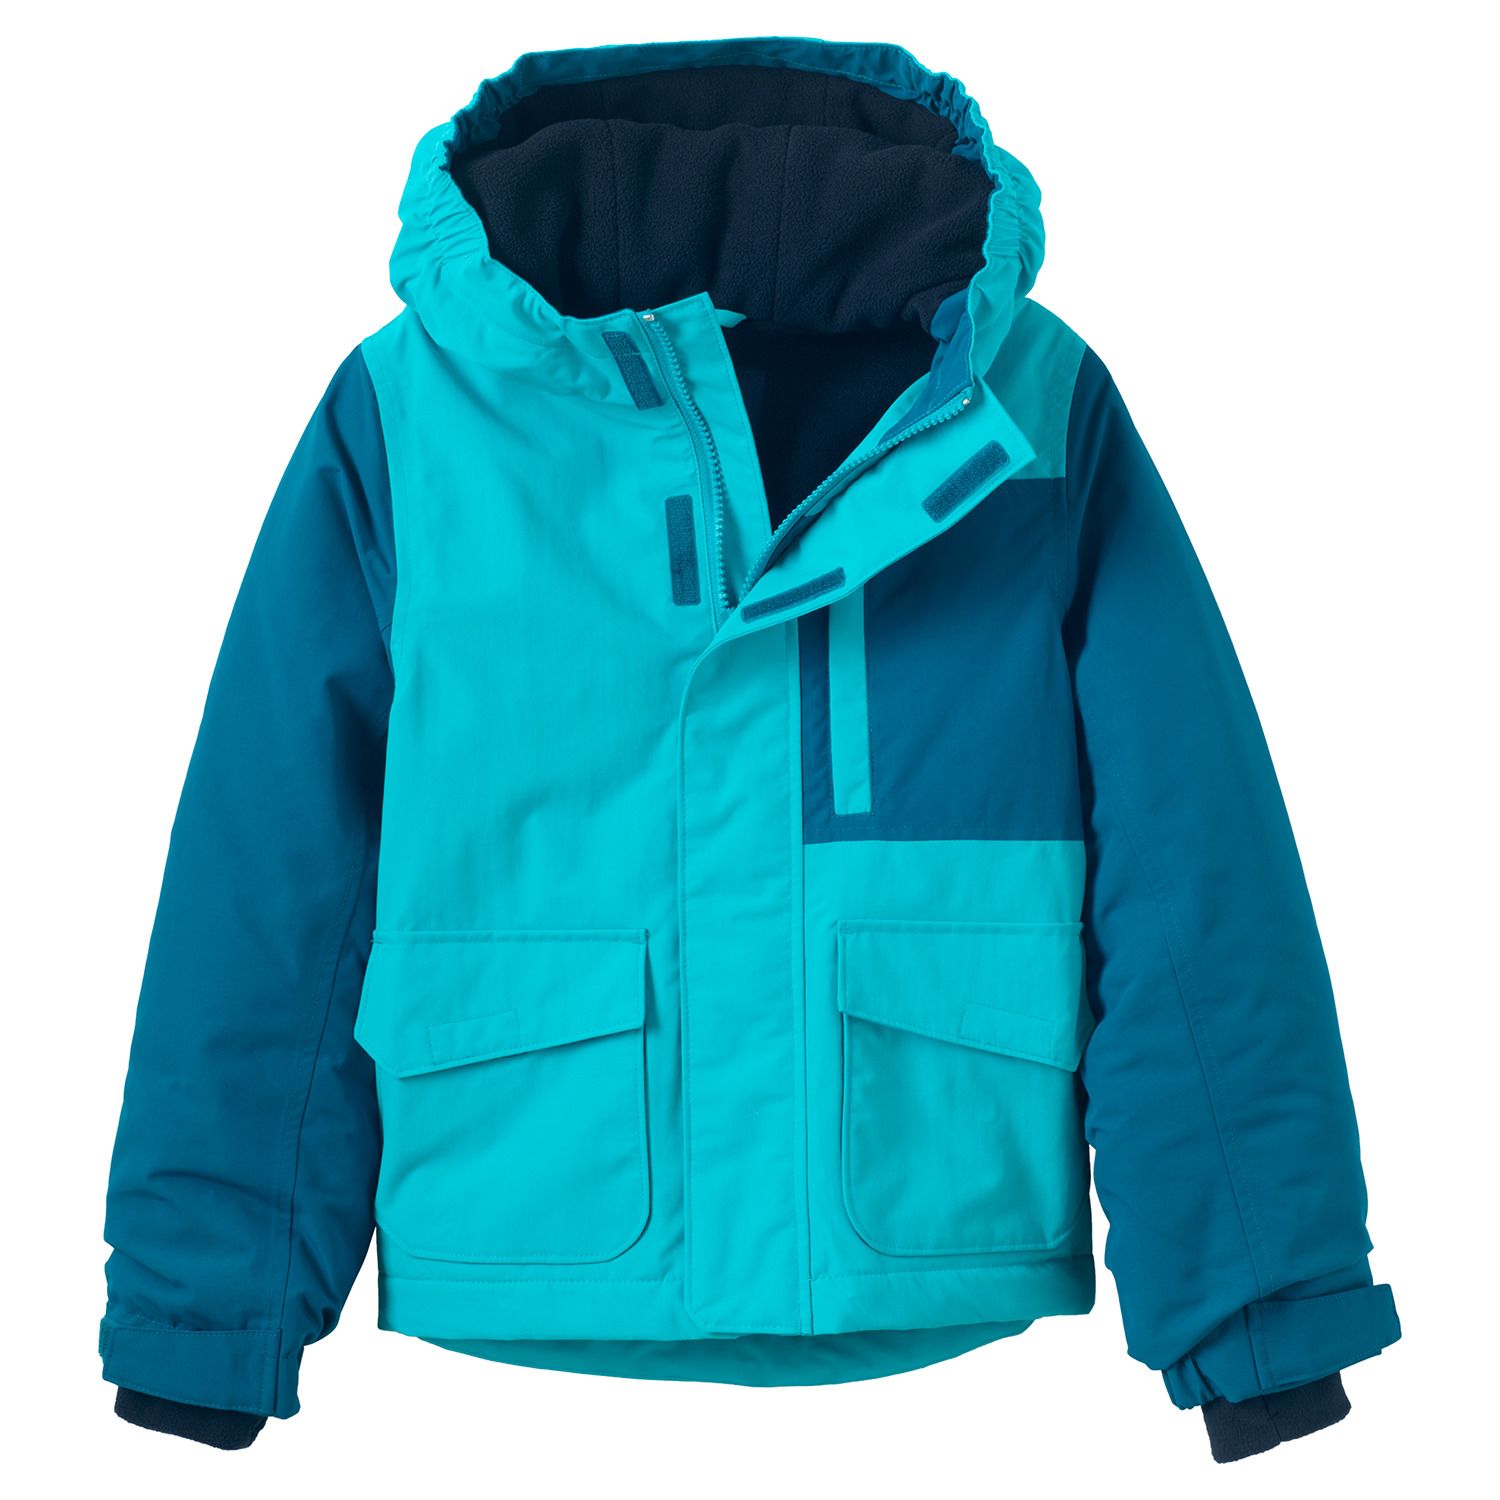 Image for Lands' End Boys 2-20 Squall Waterproof Insulated Jacket at Kohl's.